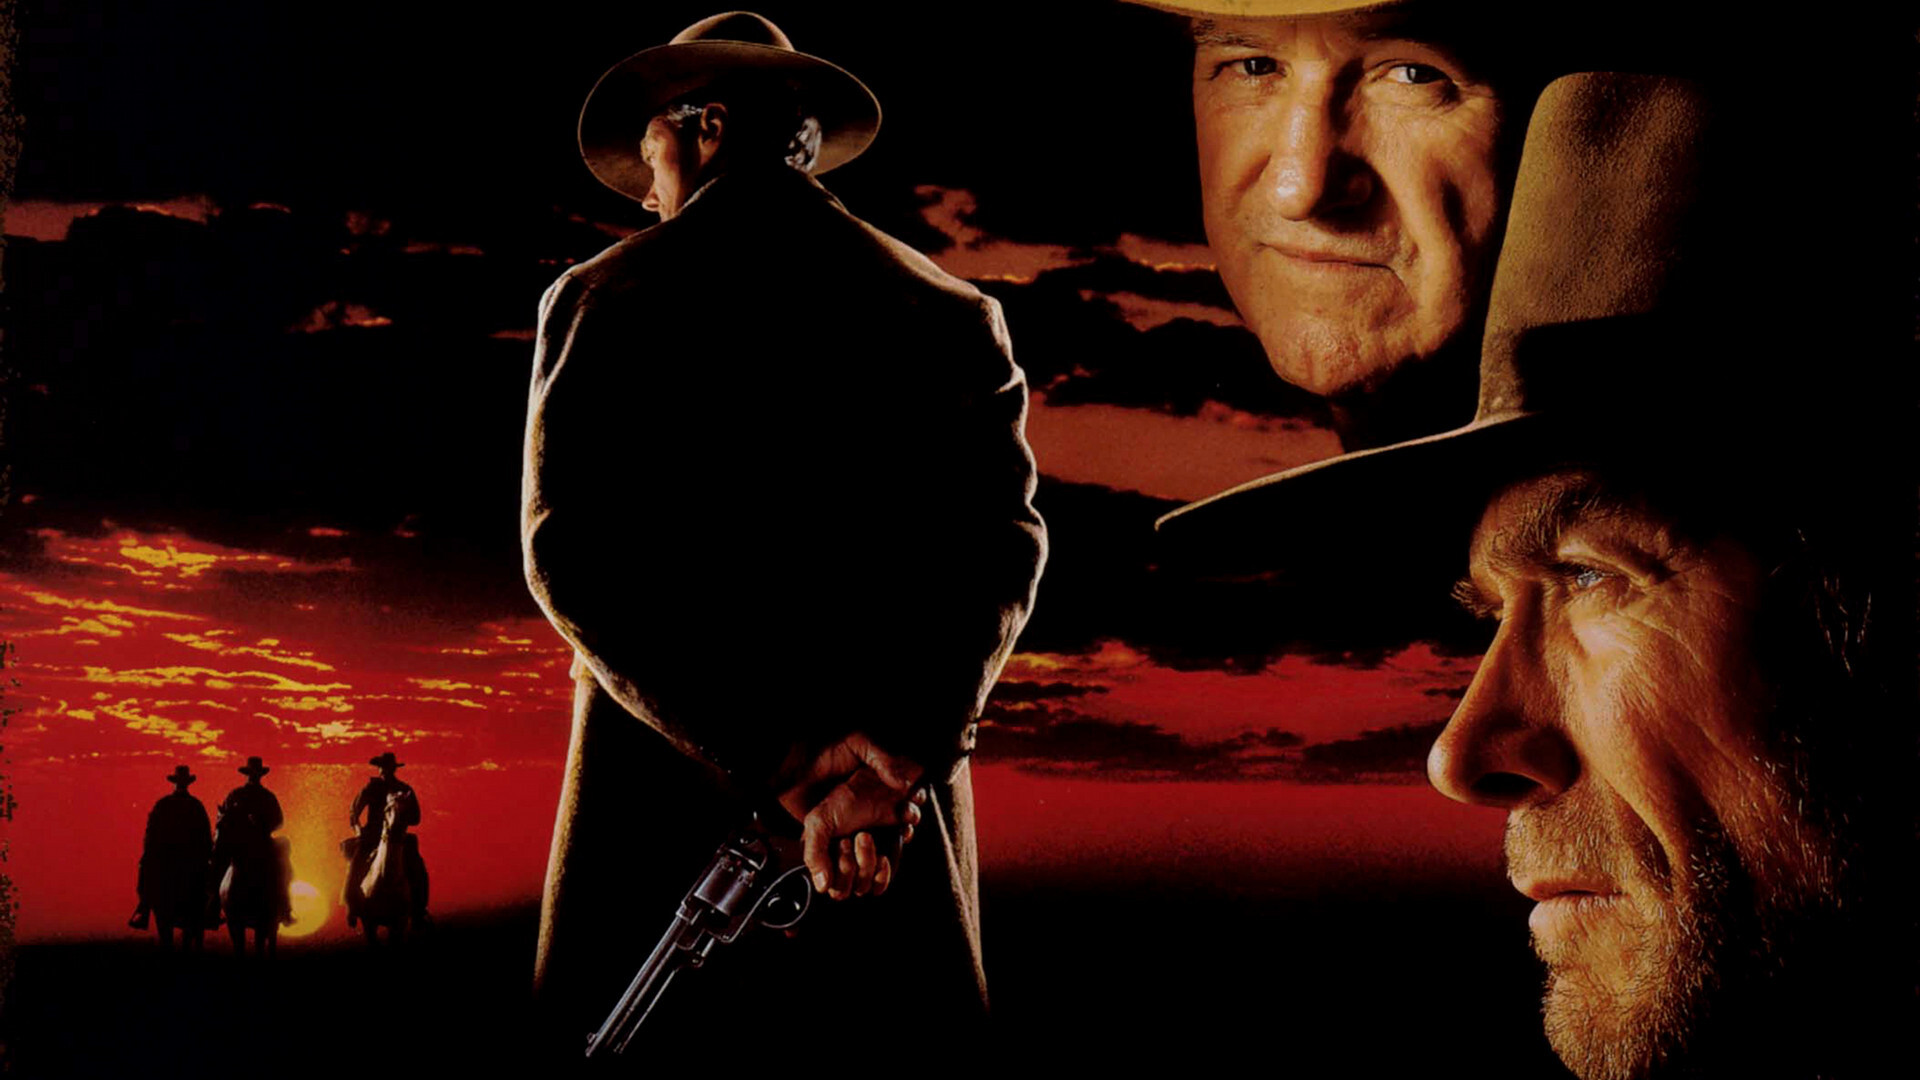 Clint Eastwood: Unforgiven, Revisionist Western Of 1992, By David Webb Peoples. 1920x1080 Full HD Background.